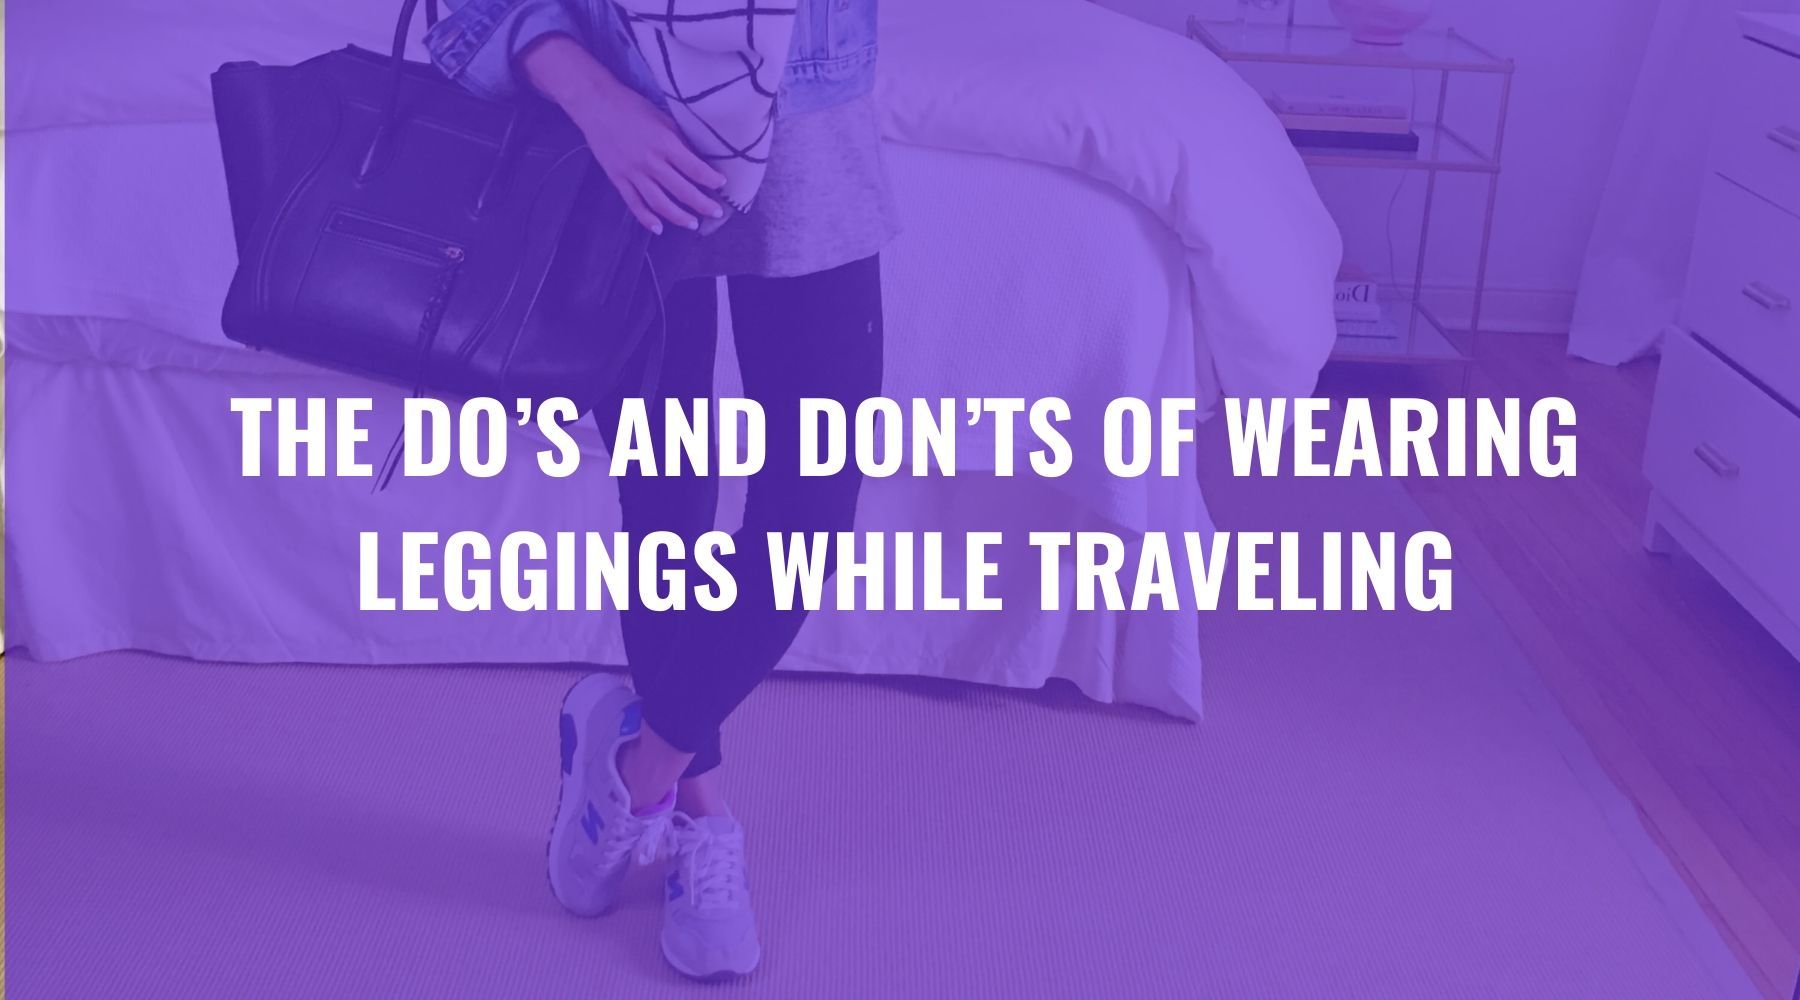 The Dos and Don’ts of Wearing Leggings While Traveling